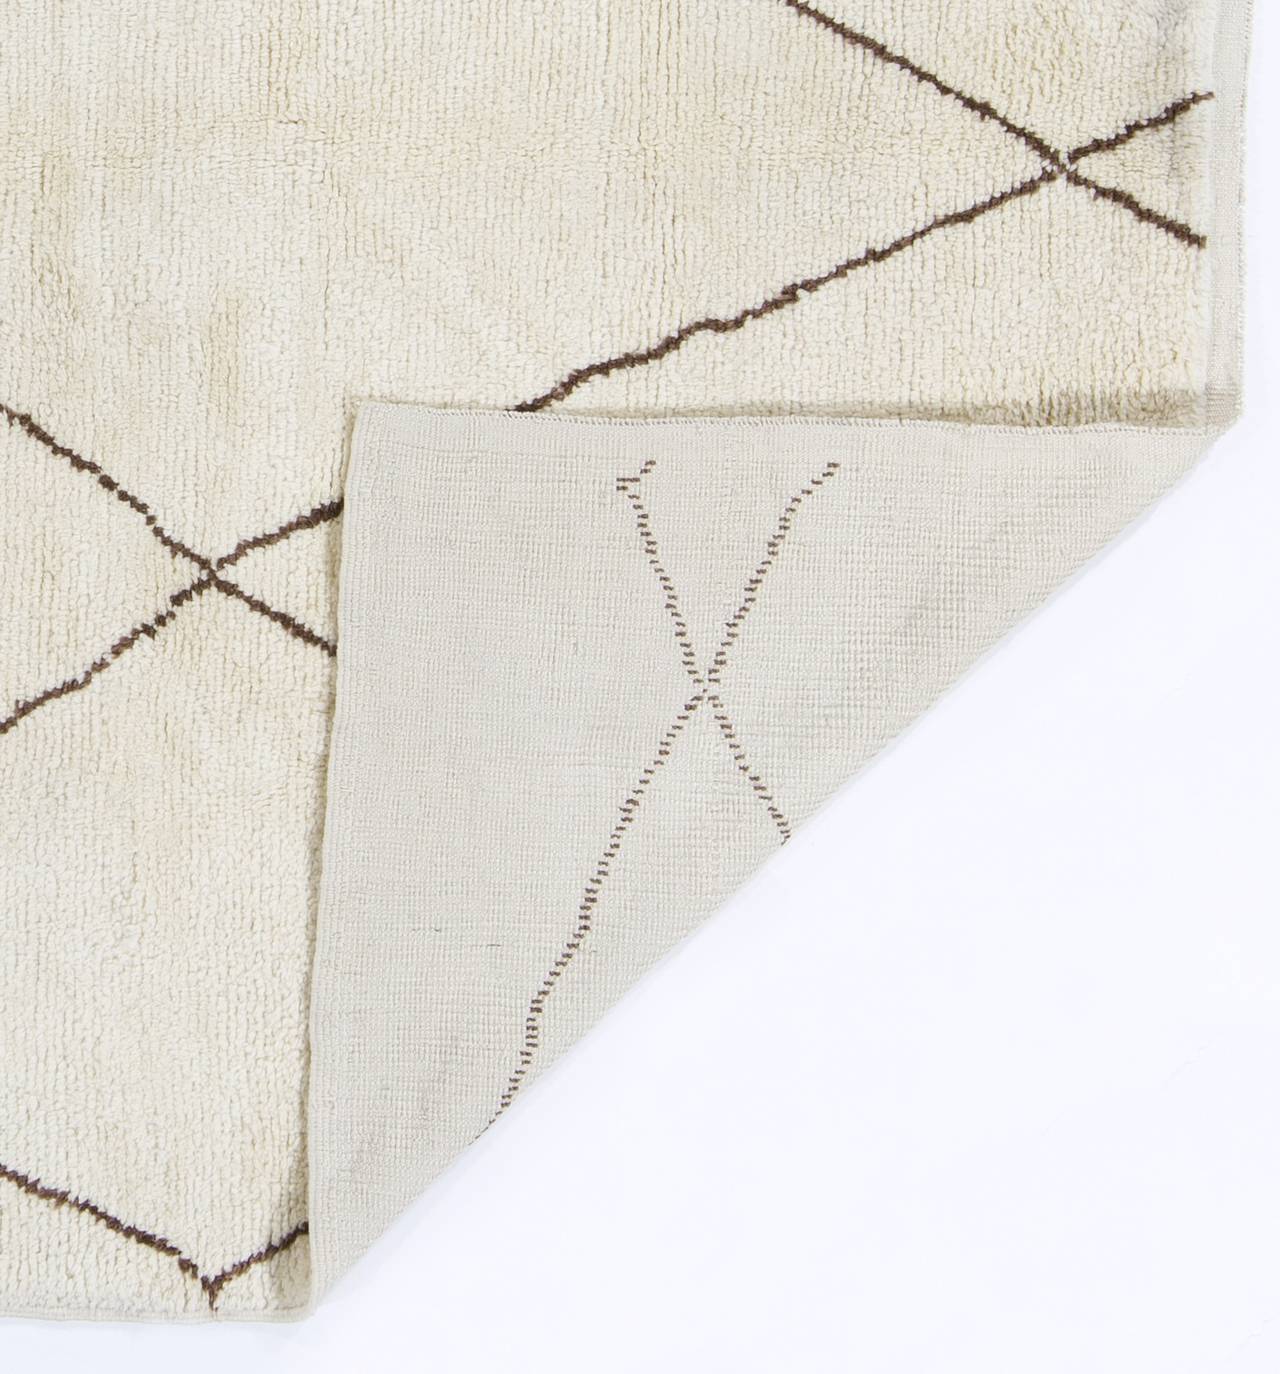 A modern handmade Moroccan rug, made of natural undyed ivory and brown wool. Soft, comfy, cozy pile.
It is available in 9 x 12 Ft (275 x 365 cm), 6 x 9 Ft (182 x 274 cm) and 3.2 x 6 Ft (95 x 180 cm) for immediate dispatch.

The rug can be custom